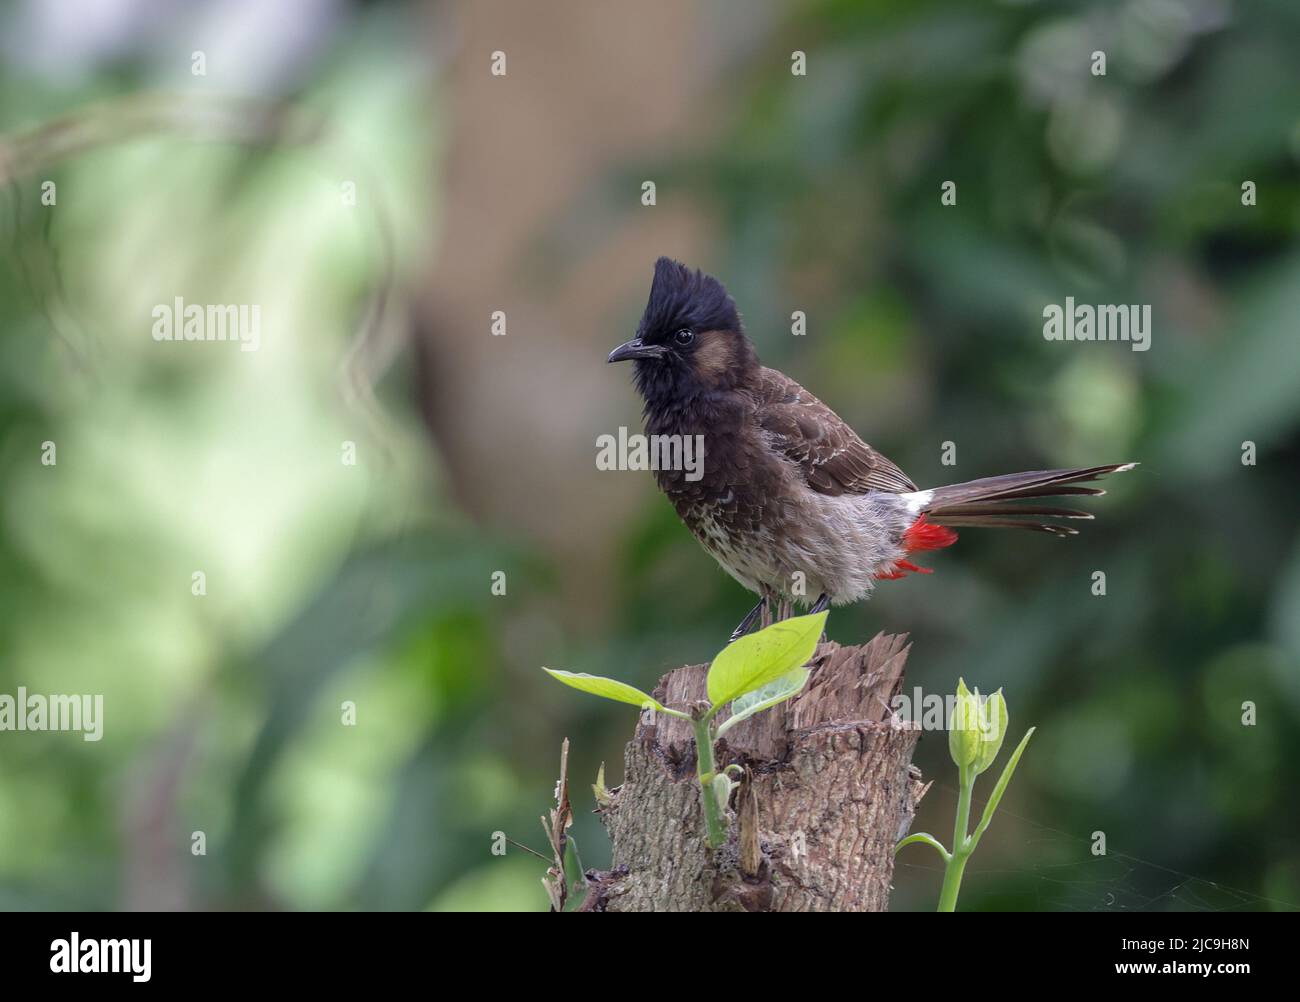 The red-vented bulbul is a member of the bulbul family of passerines. It is a resident breeder across the Indian subcontinent, including Sudan extendi Stock Photo